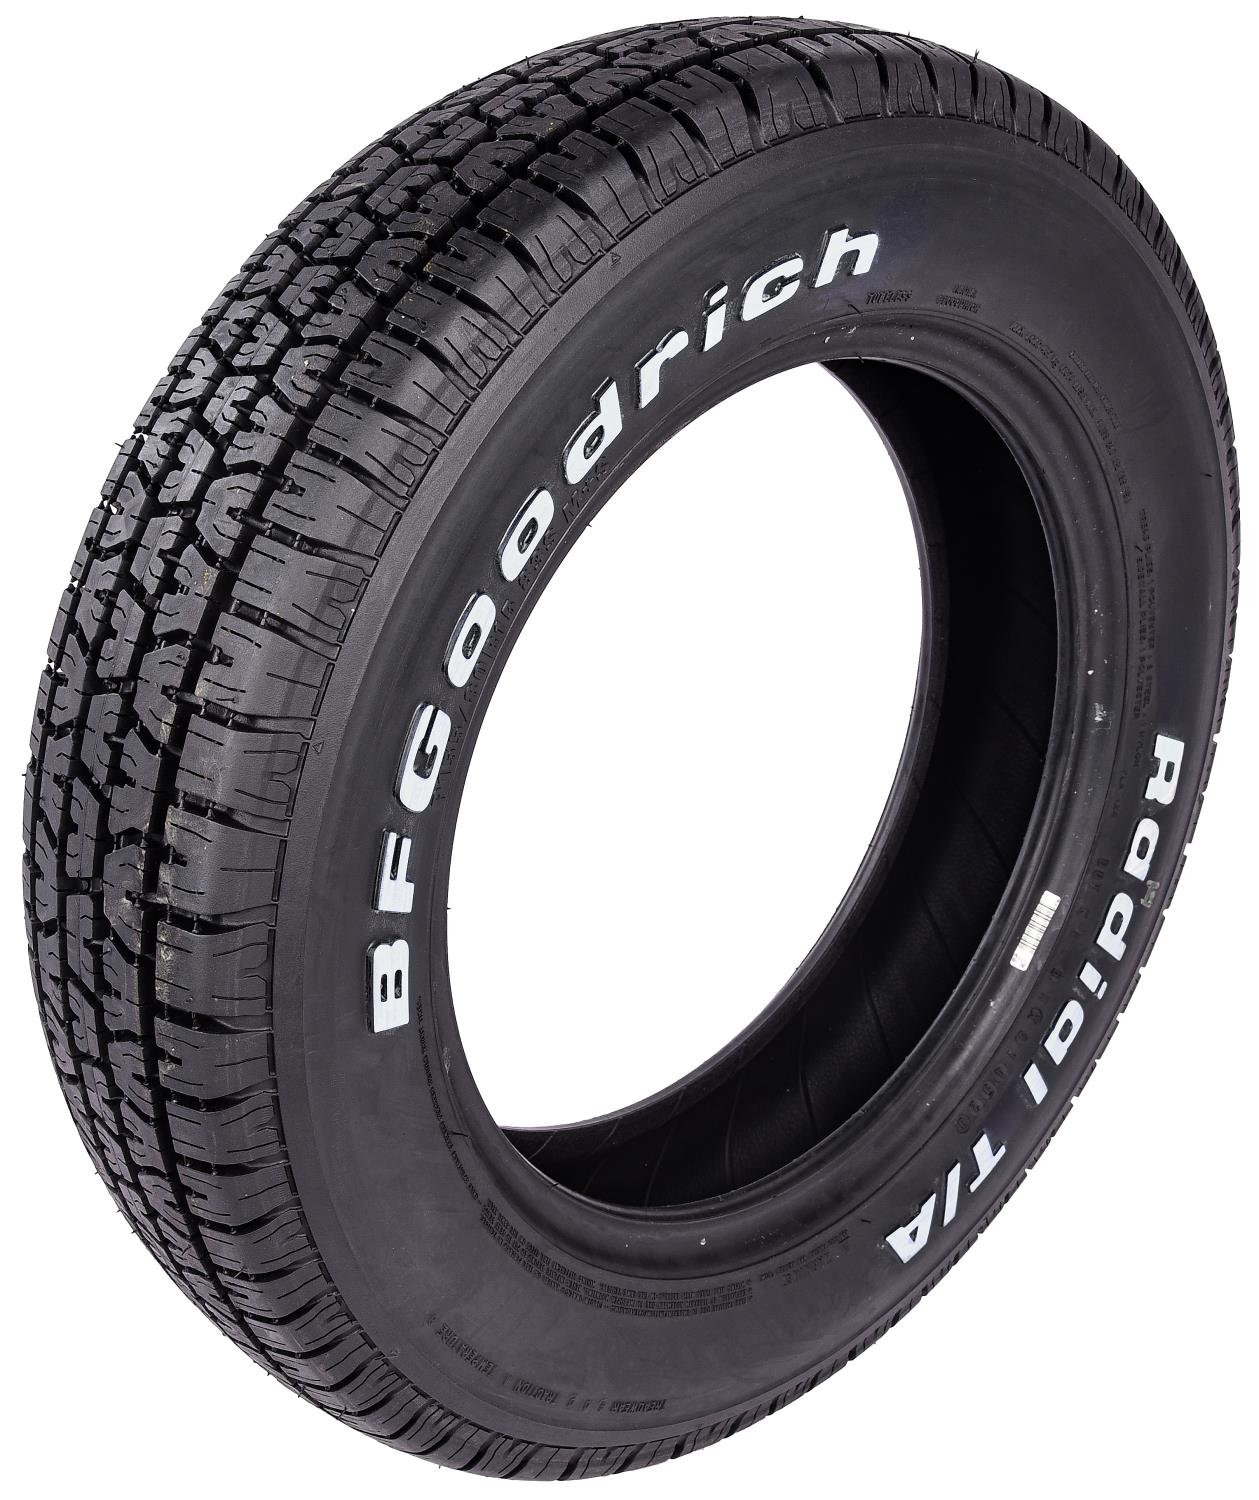 Radial T/A Tire P155/80R15